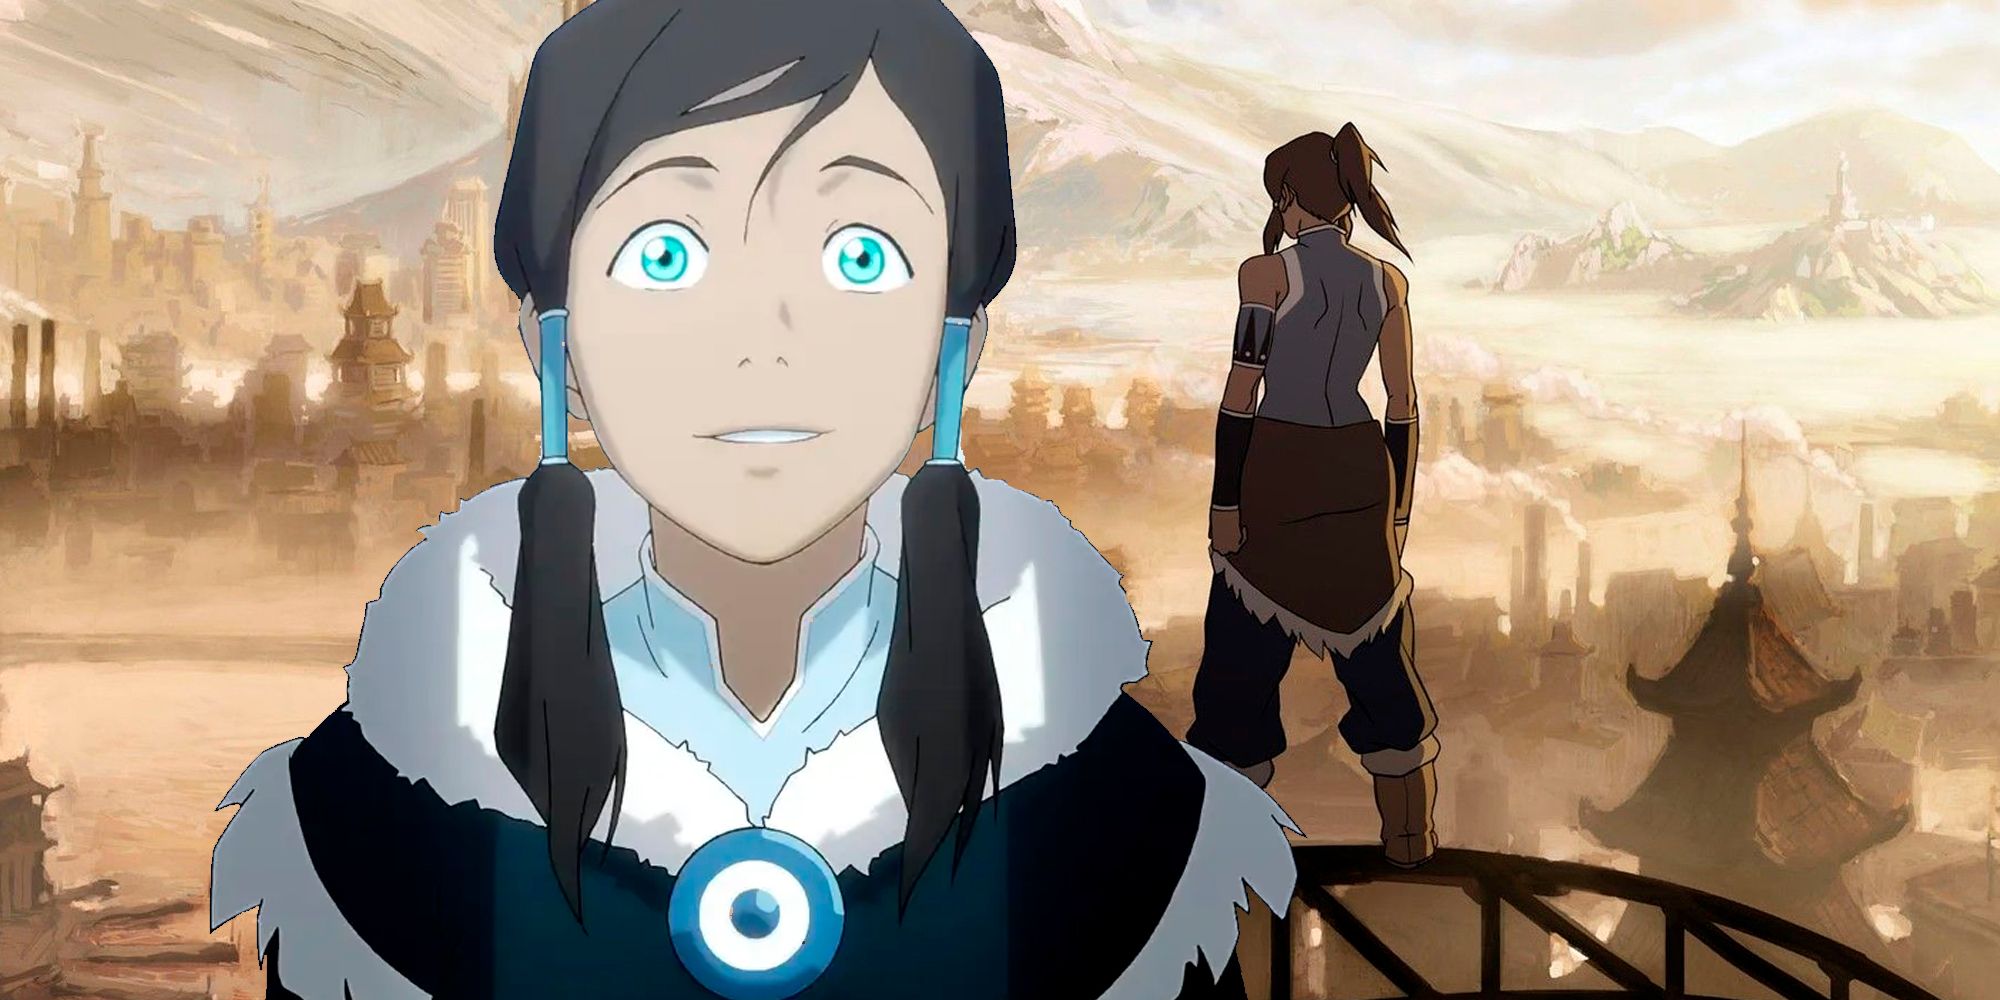 Why The Legend of Korra aired four years after Avatar The Last Airbender